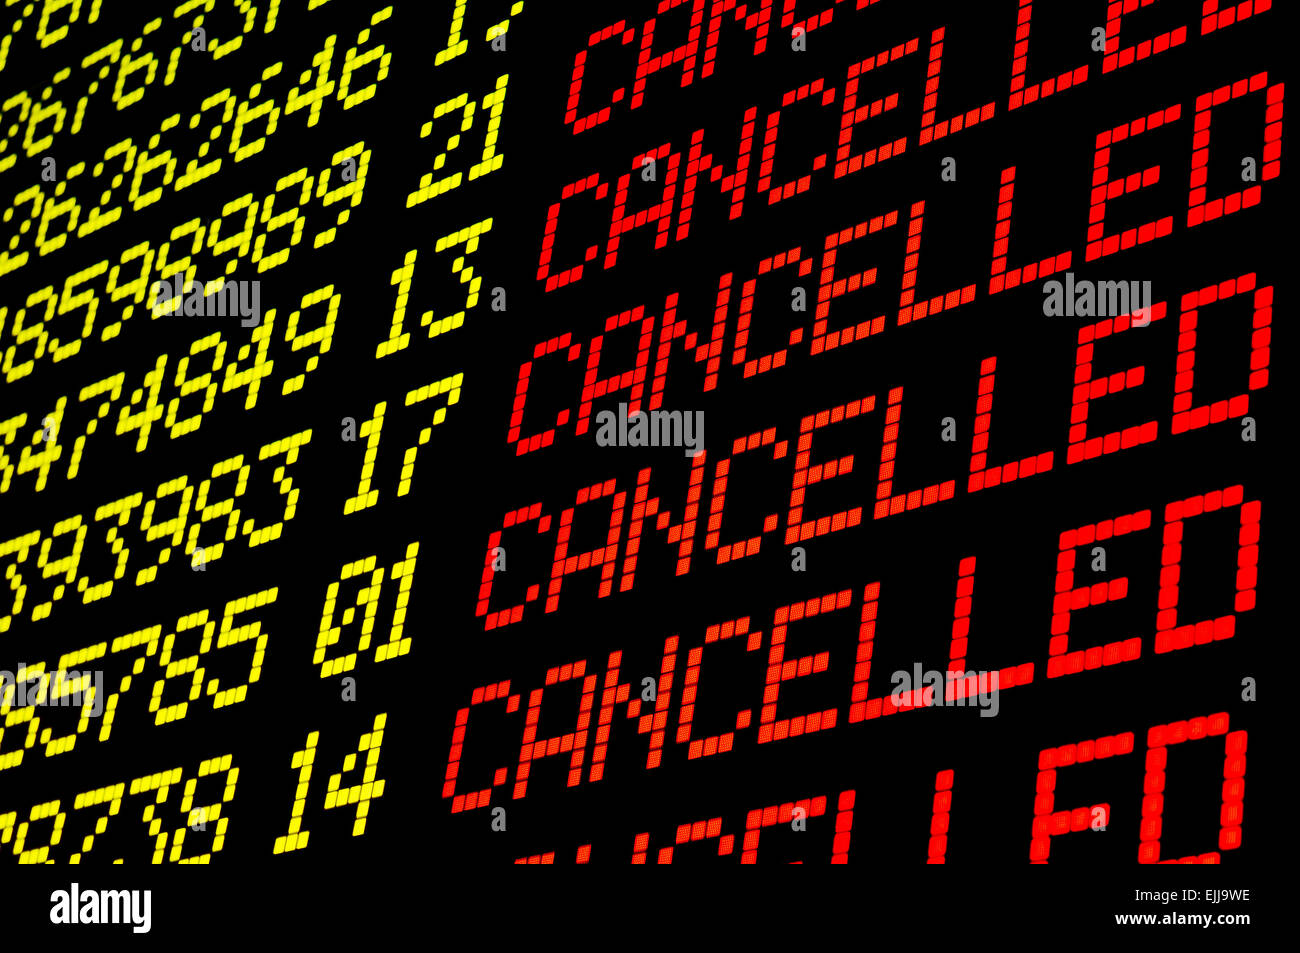 Cancelled flights on airport board panel Stock Photo